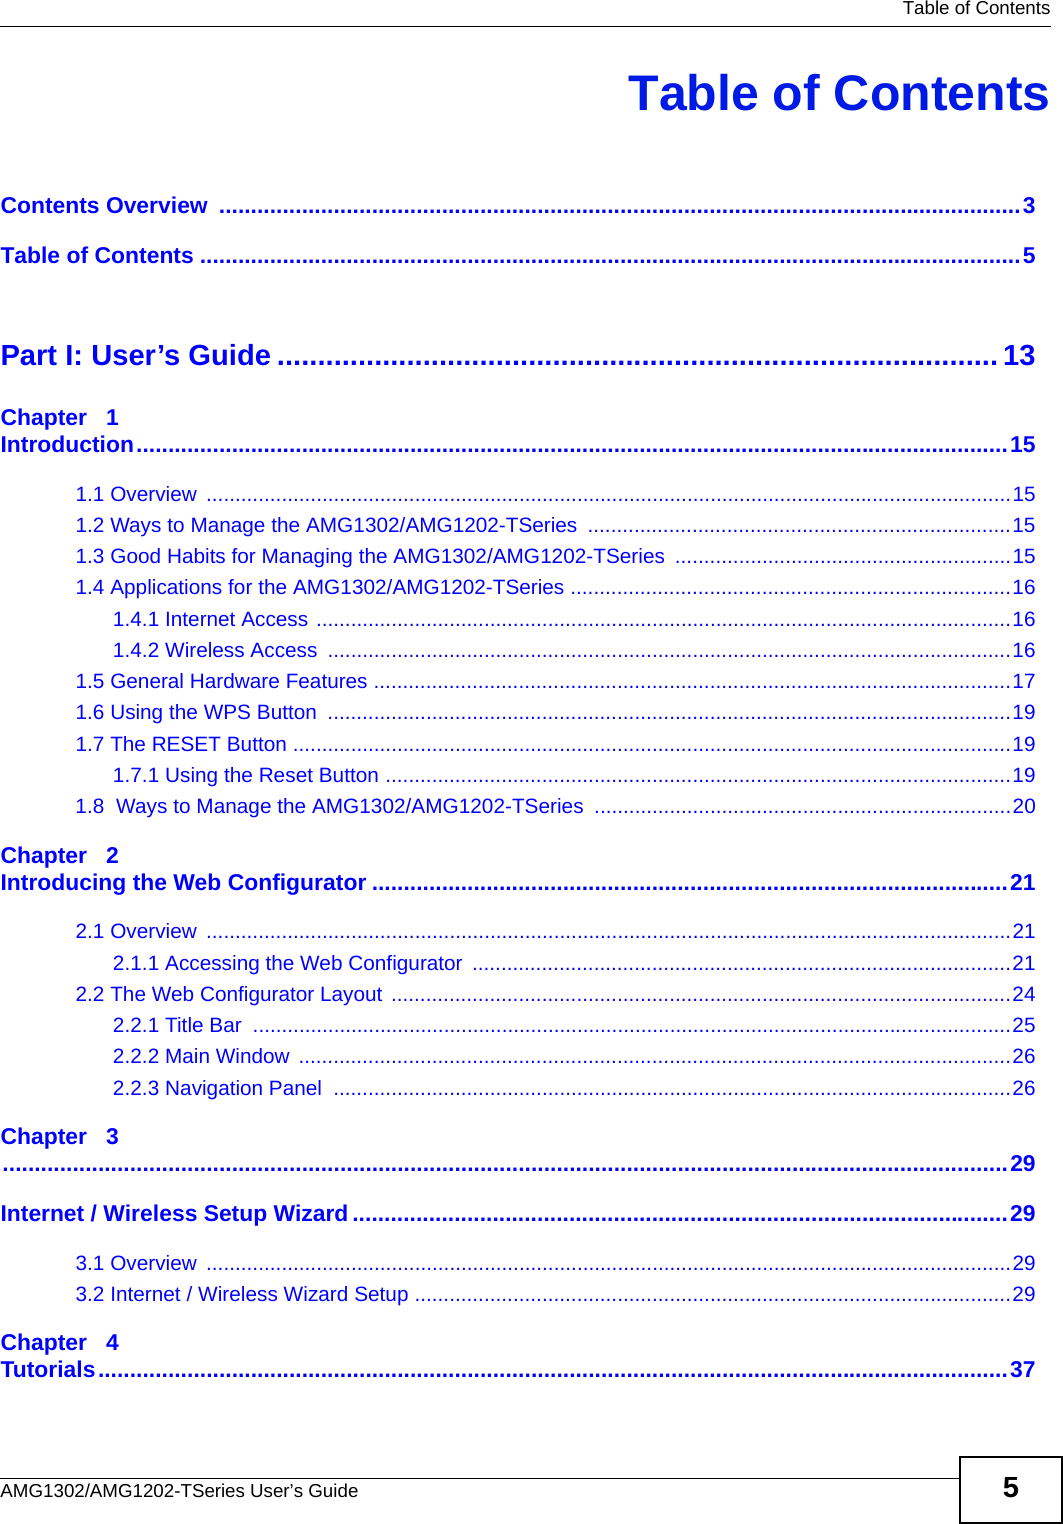   Table of ContentsAMG1302/AMG1202-TSeries User’s Guide 5Table of ContentsContents Overview  ..............................................................................................................................3Table of Contents .................................................................................................................................5Part I: User’s Guide ......................................................................................... 13Chapter   1Introduction.........................................................................................................................................151.1 Overview  ...........................................................................................................................................151.2 Ways to Manage the AMG1302/AMG1202-TSeries  .........................................................................151.3 Good Habits for Managing the AMG1302/AMG1202-TSeries ..........................................................151.4 Applications for the AMG1302/AMG1202-TSeries ............................................................................161.4.1 Internet Access ........................................................................................................................161.4.2 Wireless Access  ......................................................................................................................161.5 General Hardware Features ..............................................................................................................171.6 Using the WPS Button  ......................................................................................................................191.7 The RESET Button ............................................................................................................................191.7.1 Using the Reset Button ............................................................................................................191.8  Ways to Manage the AMG1302/AMG1202-TSeries  ........................................................................20Chapter   2Introducing the Web Configurator ....................................................................................................212.1 Overview  ...........................................................................................................................................212.1.1 Accessing the Web Configurator  .............................................................................................212.2 The Web Configurator Layout ...........................................................................................................242.2.1 Title Bar  ...................................................................................................................................252.2.2 Main Window  ...........................................................................................................................262.2.3 Navigation Panel  .....................................................................................................................26Chapter   3..............................................................................................................................................................29Internet / Wireless Setup Wizard.......................................................................................................293.1 Overview  ...........................................................................................................................................293.2 Internet / Wireless Wizard Setup .......................................................................................................29Chapter   4Tutorials...............................................................................................................................................37